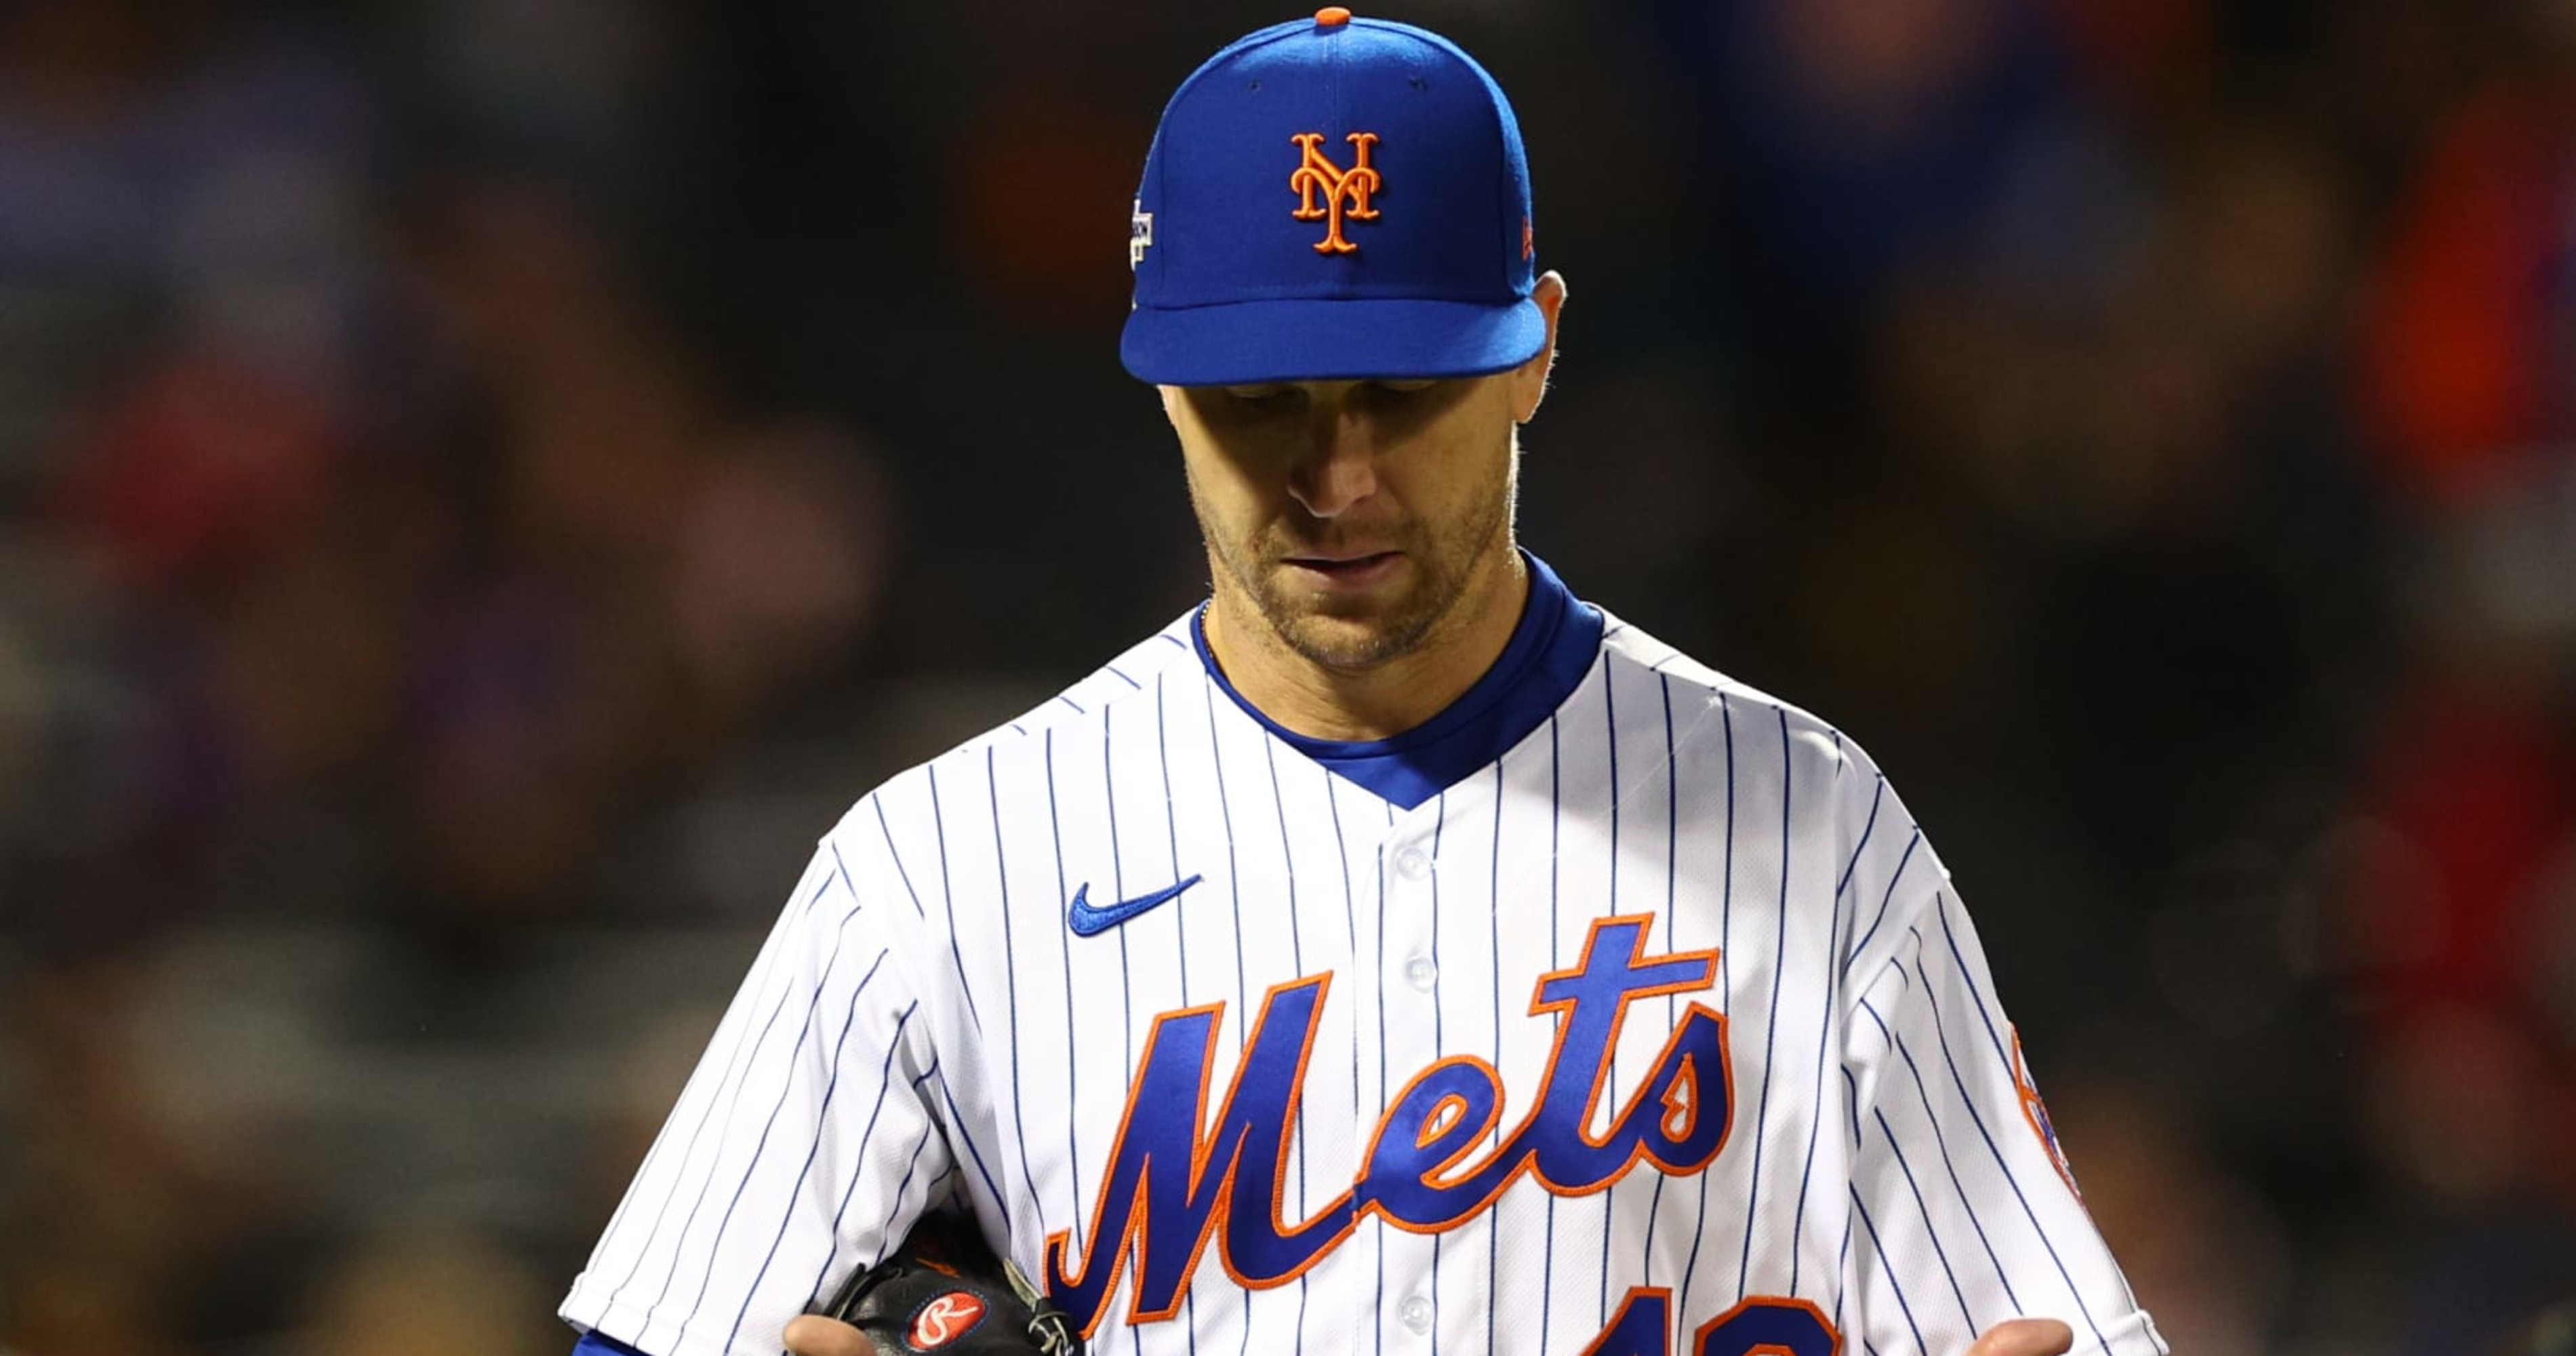 Yankees Rumors: Jacob deGrom's Medical Information Requested amid